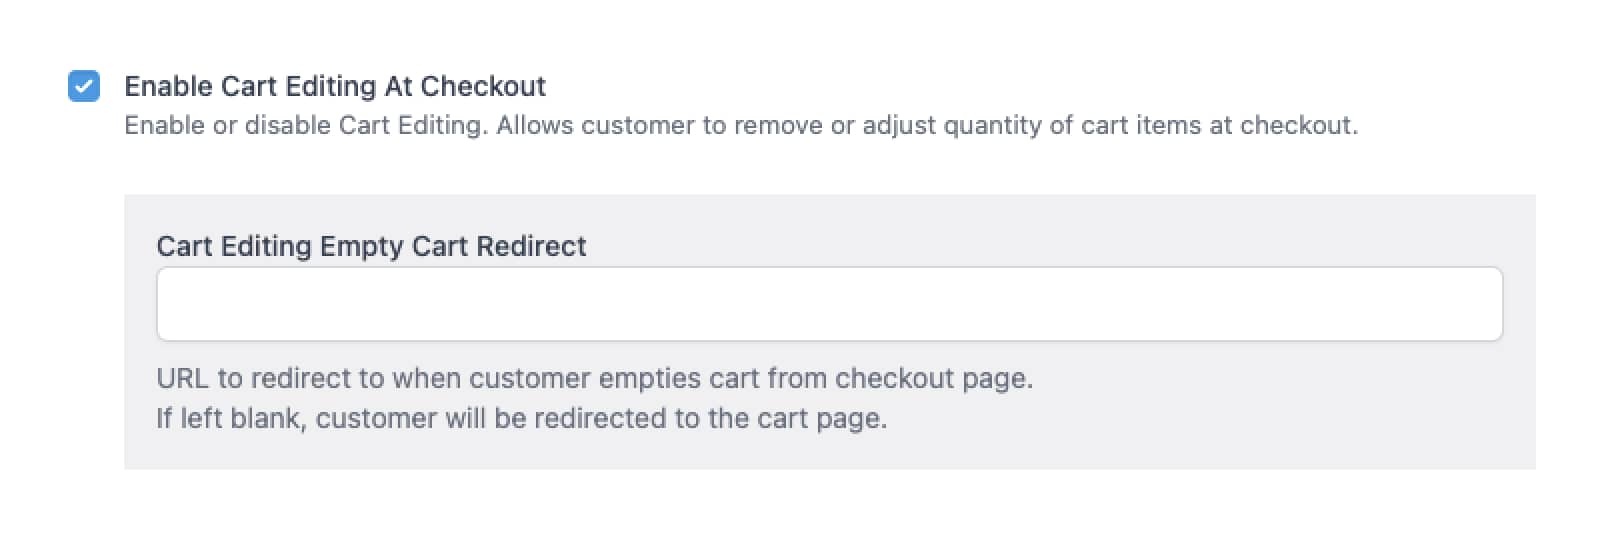 Enable Cart Editing At Checkout - CheckoutWC Setting